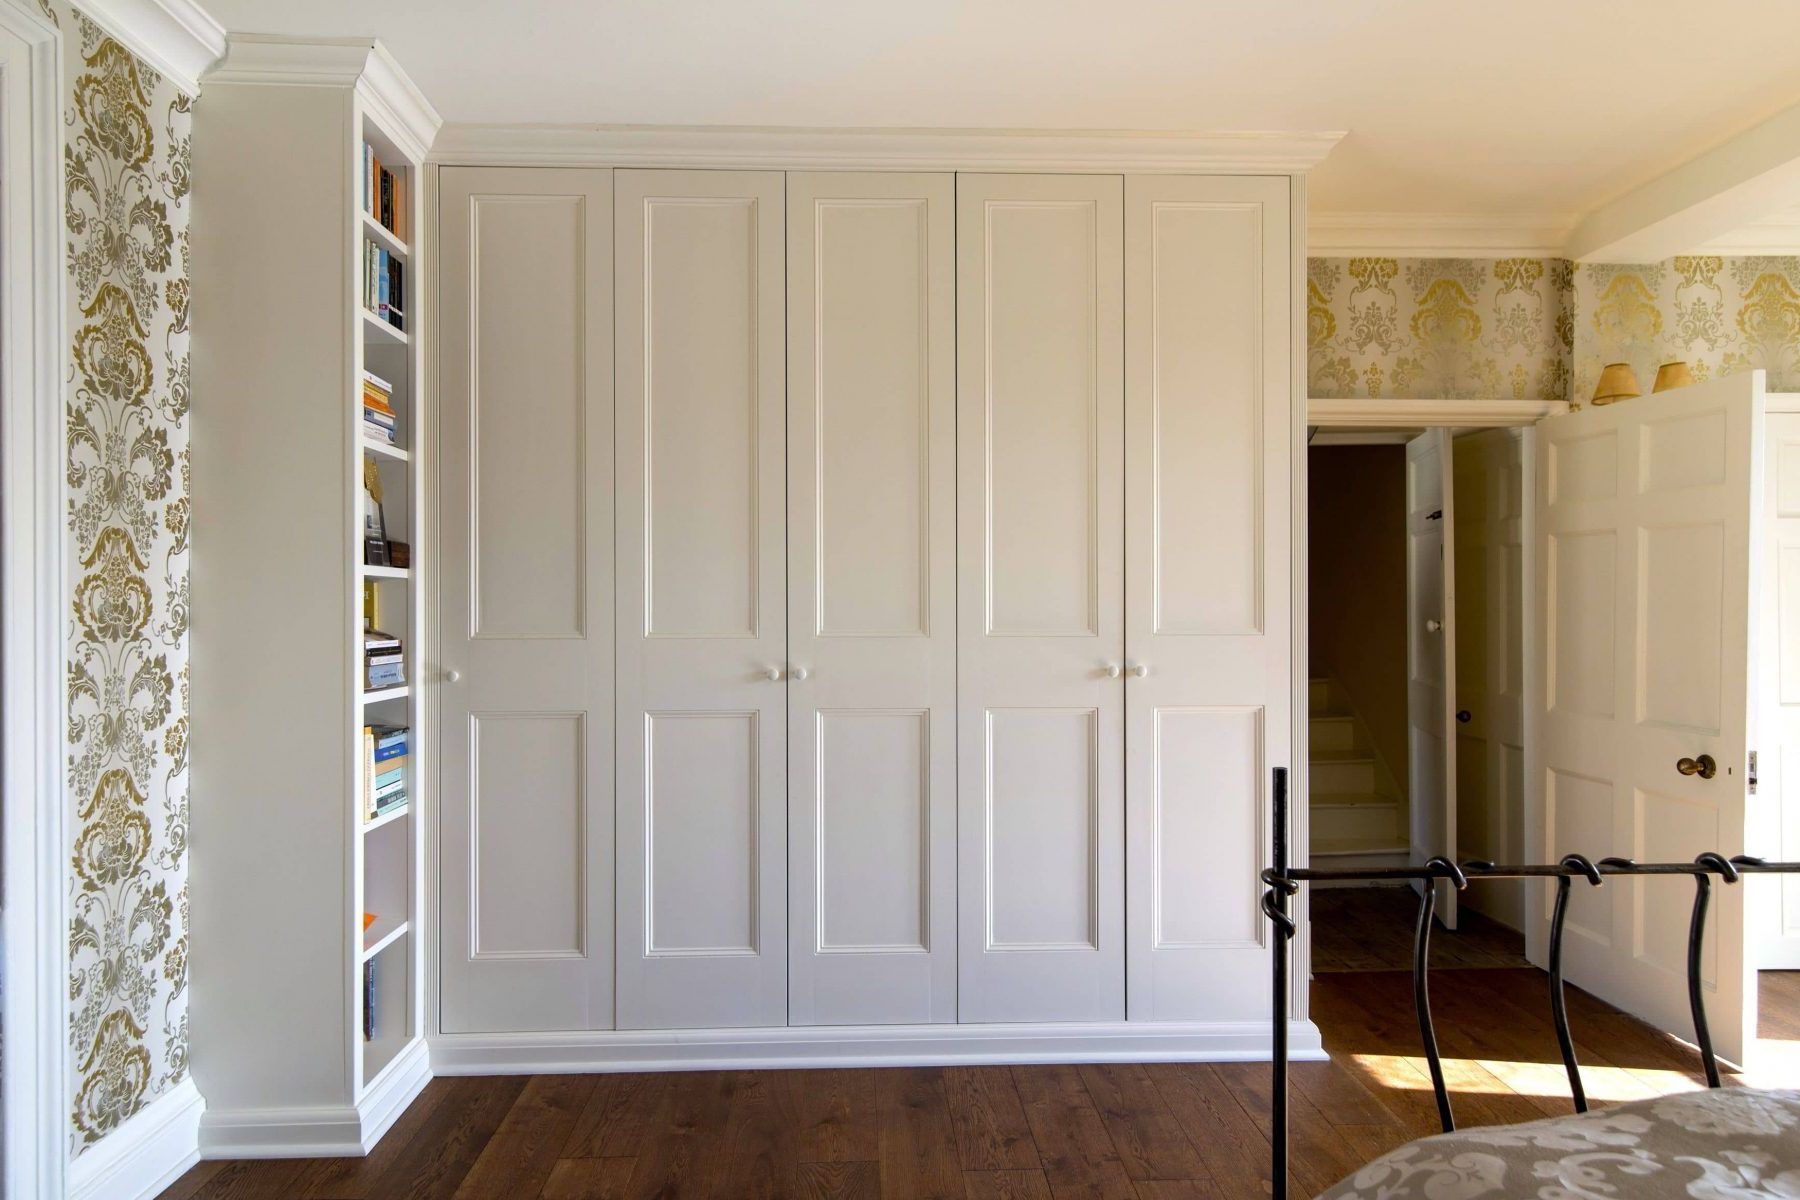 Image Result For Building Fitted Wardrobes Traditional Doors | Fitted  Wardrobes, Bespoke Wardrobe, Built In Wardrobe Within Traditional Wardrobes (View 3 of 20)